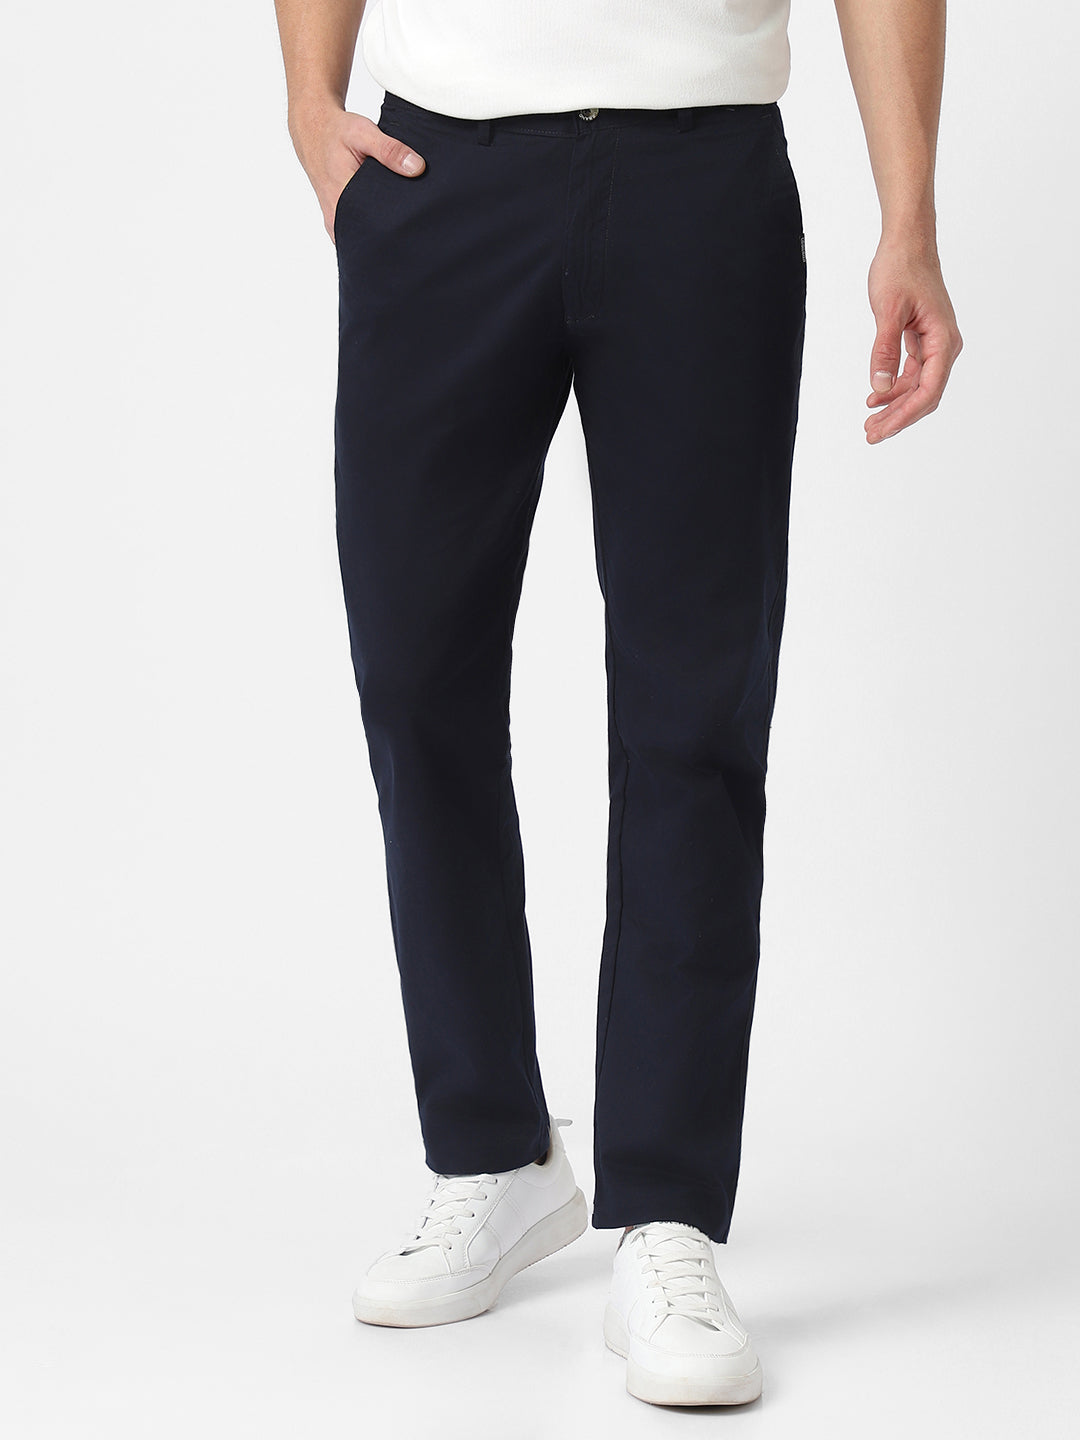 Men's Dark Blue Cotton Light Weight Non-Stretch Slim Fit Casual Trousers